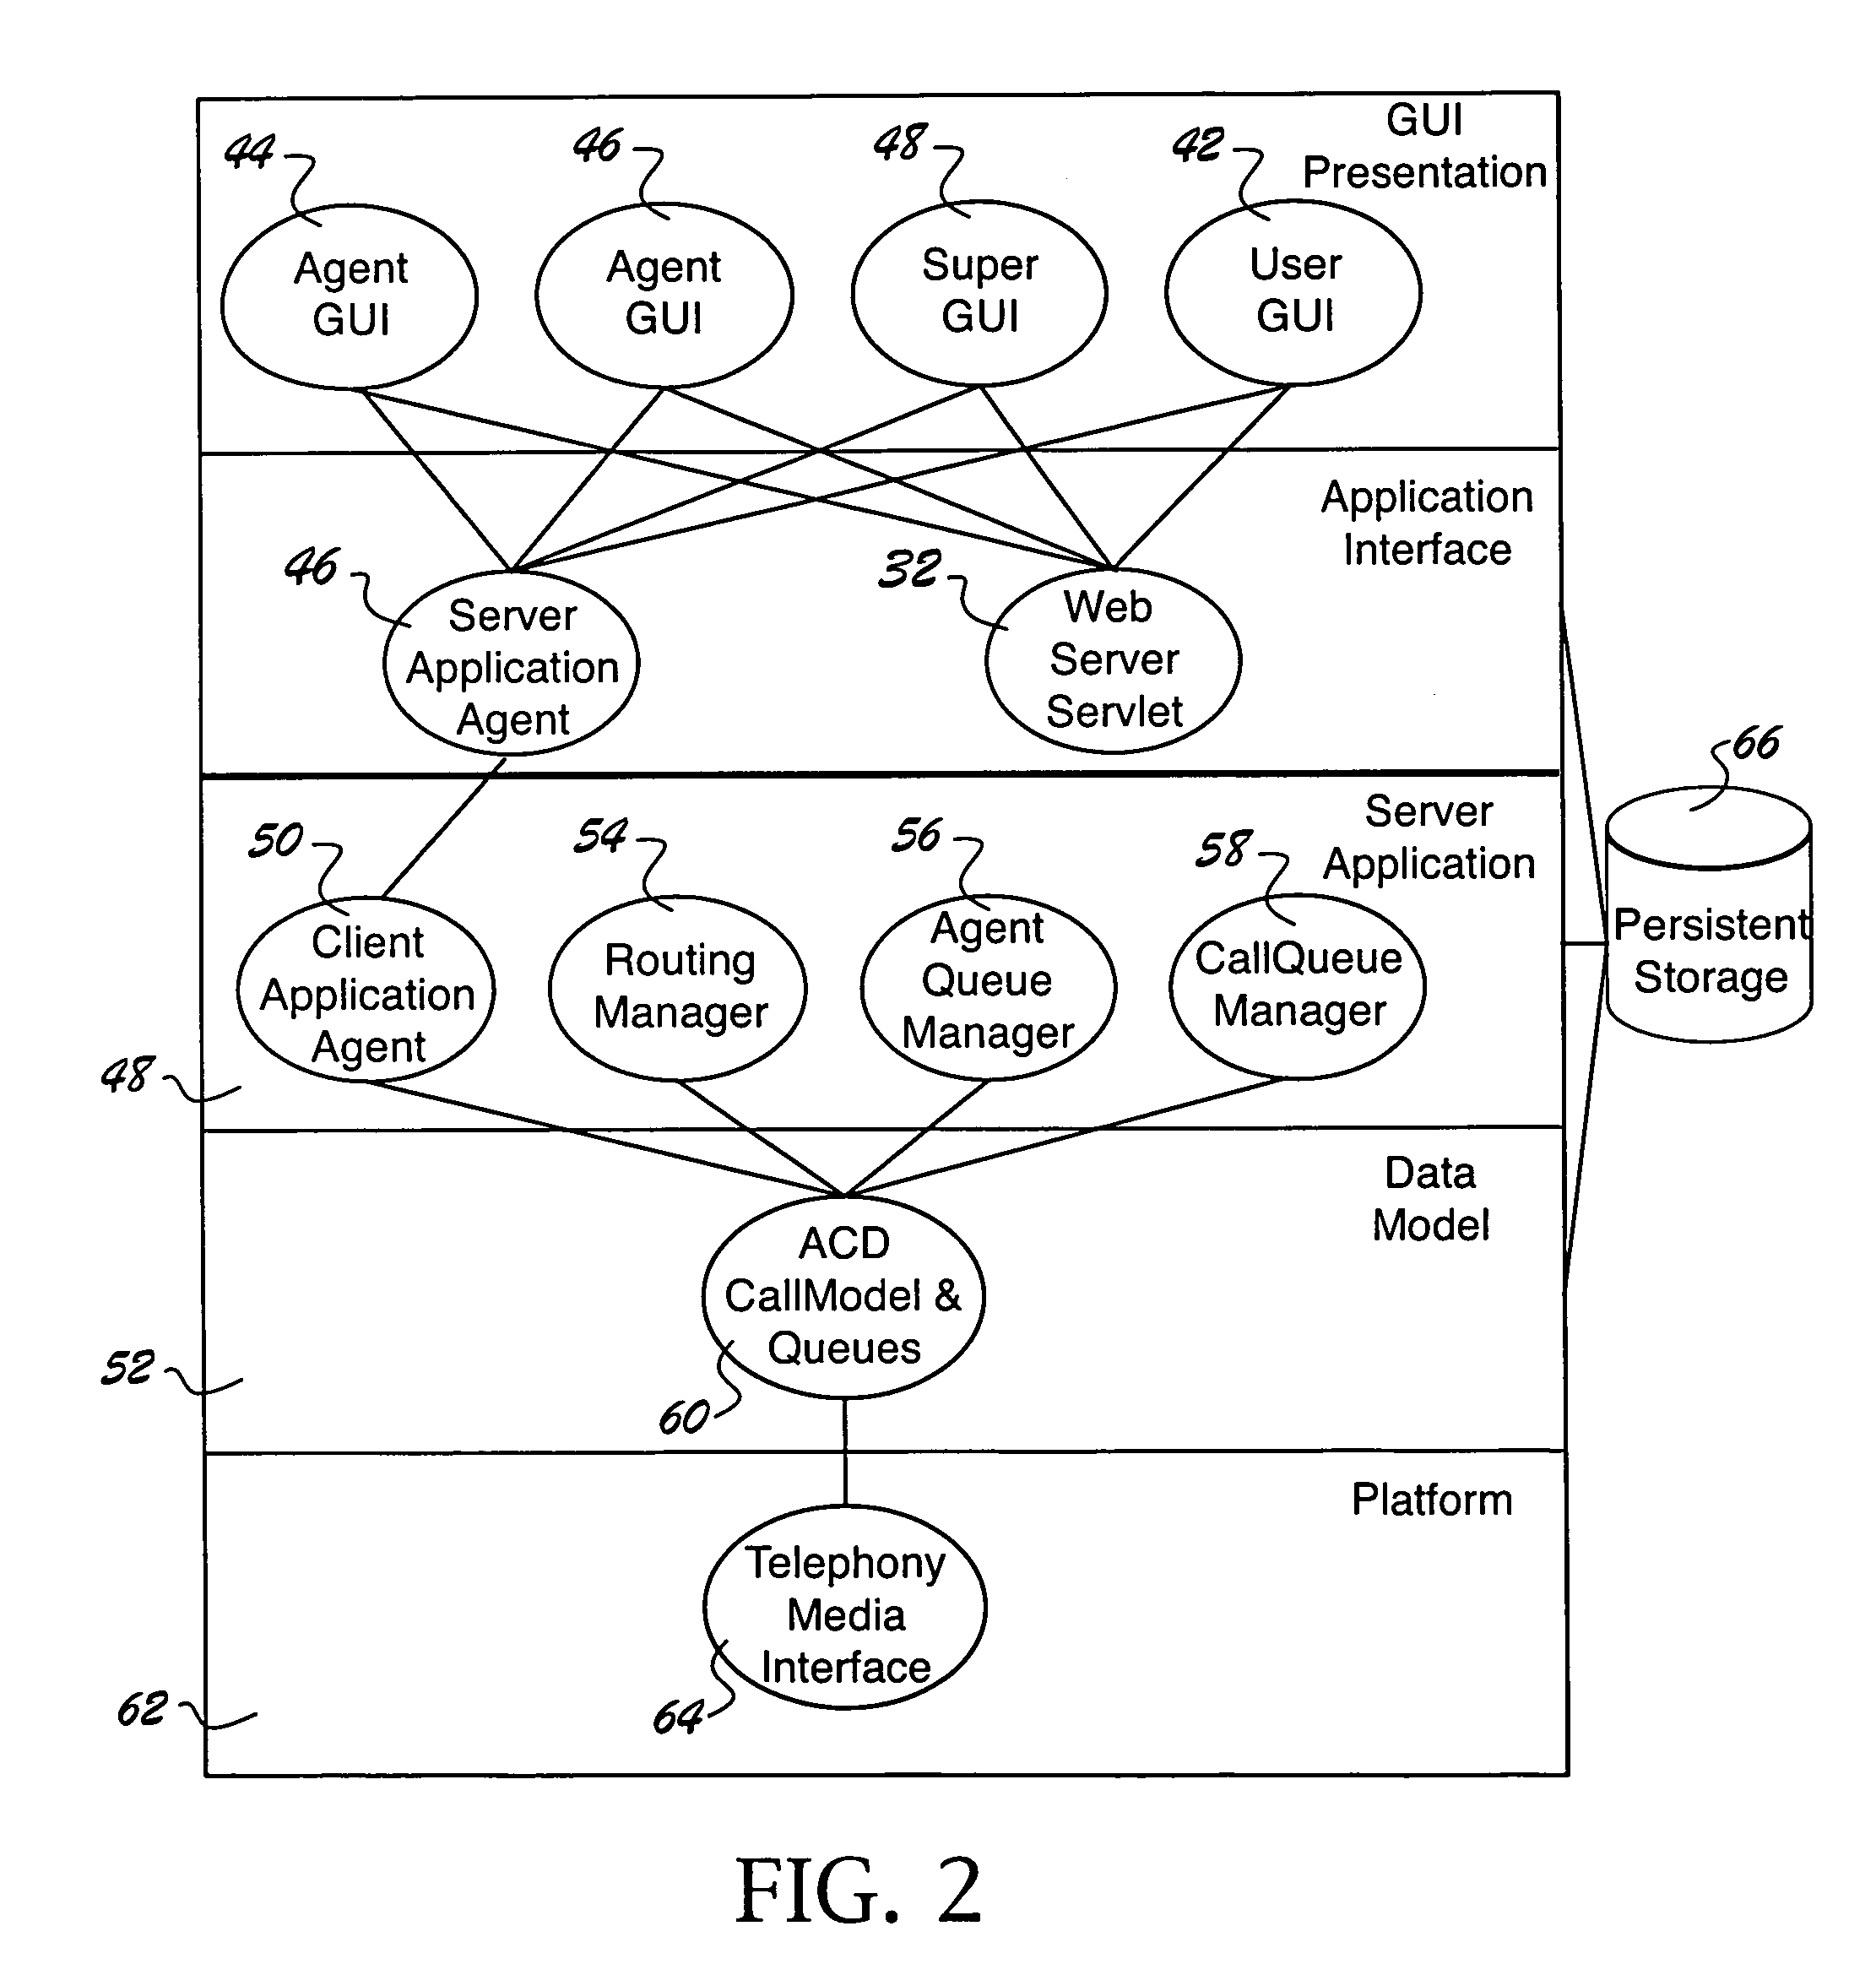 Web-content aware automatic call transfer system and process for mobile users and operators